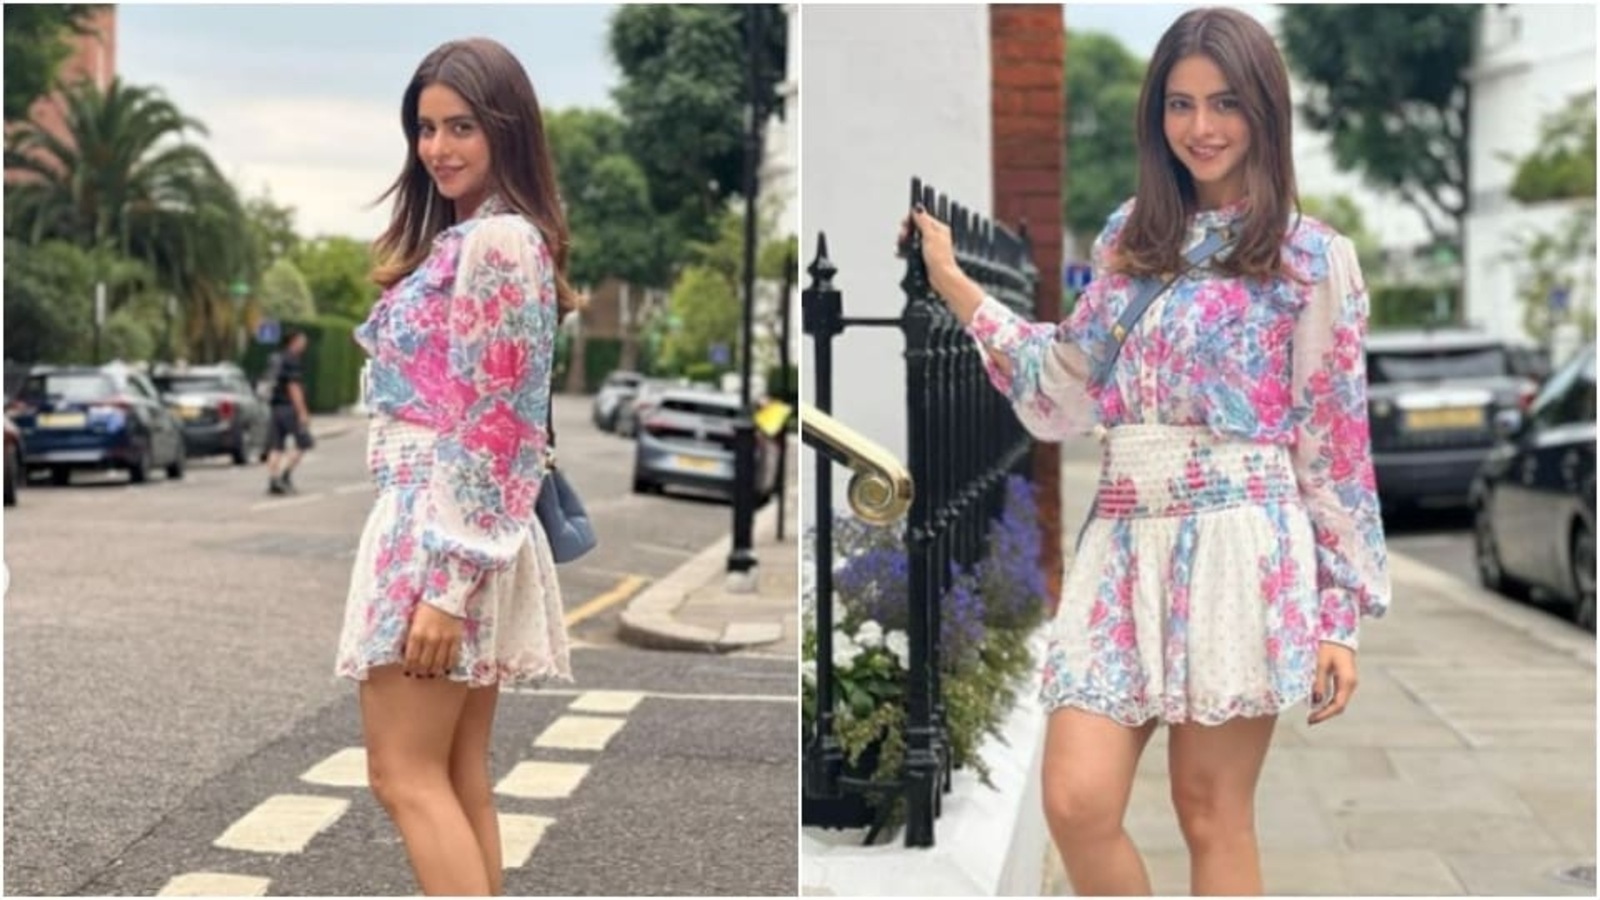 Aamna Sharif takes over London in a floral co-ord set